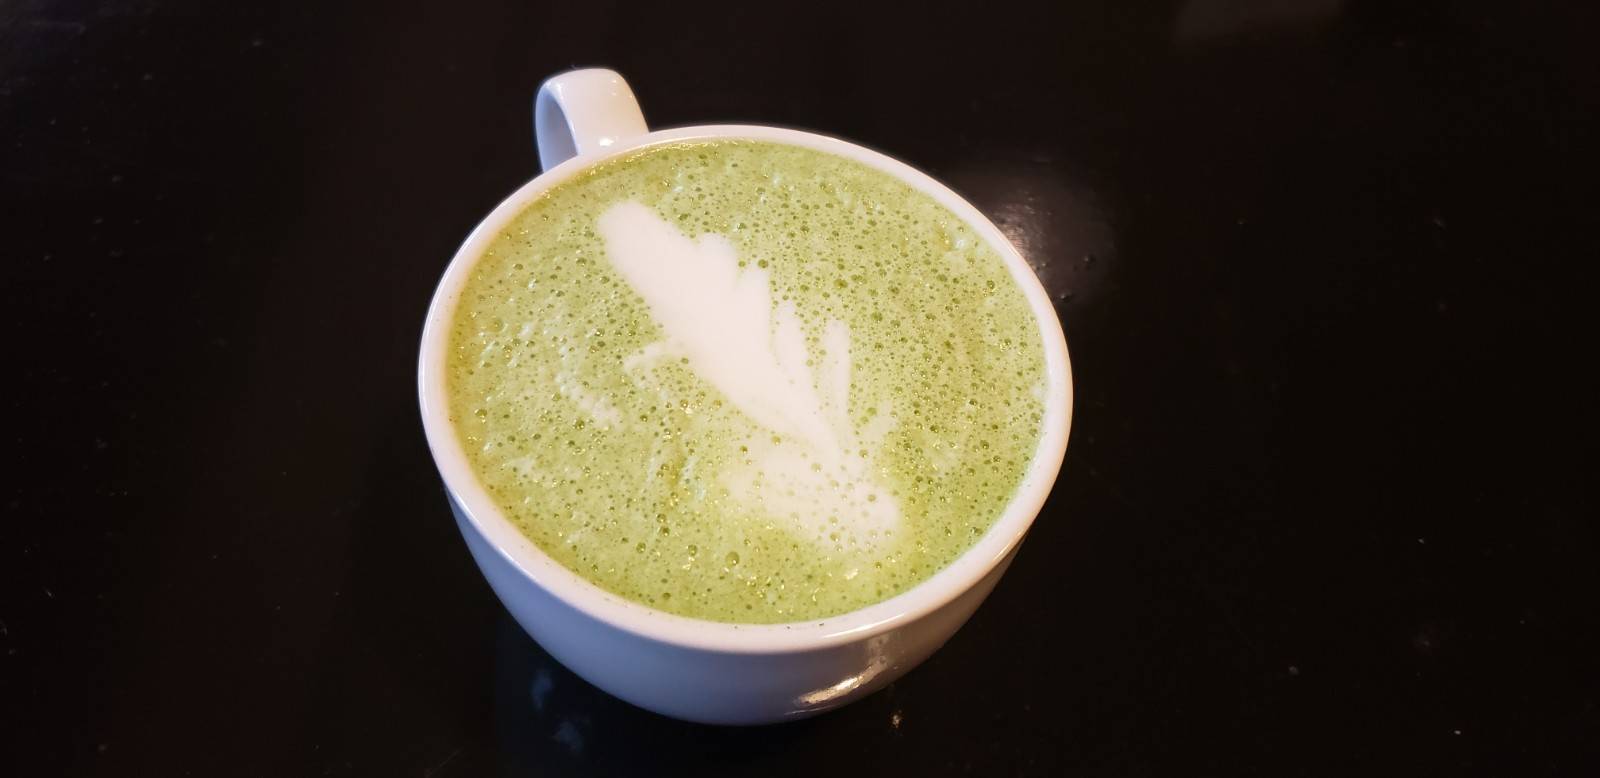 A matcha latte at Cafeteria & Company. Green matcha latte features a white feather design in the milk foam. The mug is white and sits on a black table. Photo by Elaine Sine. 